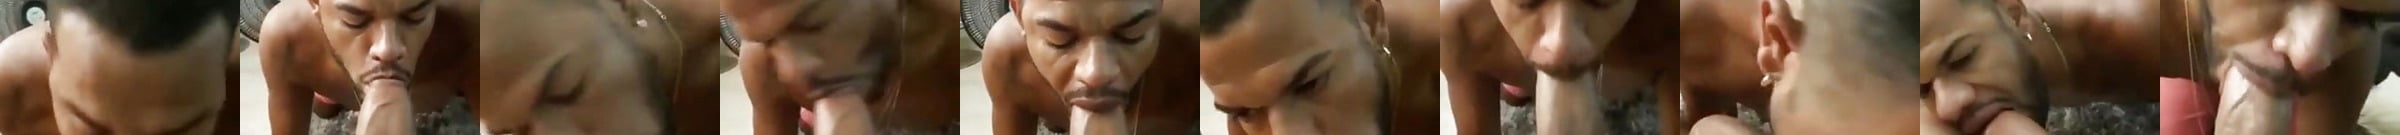 12inch Black Cock Getting Sucked Gay Porn 2c XHamster XHamster